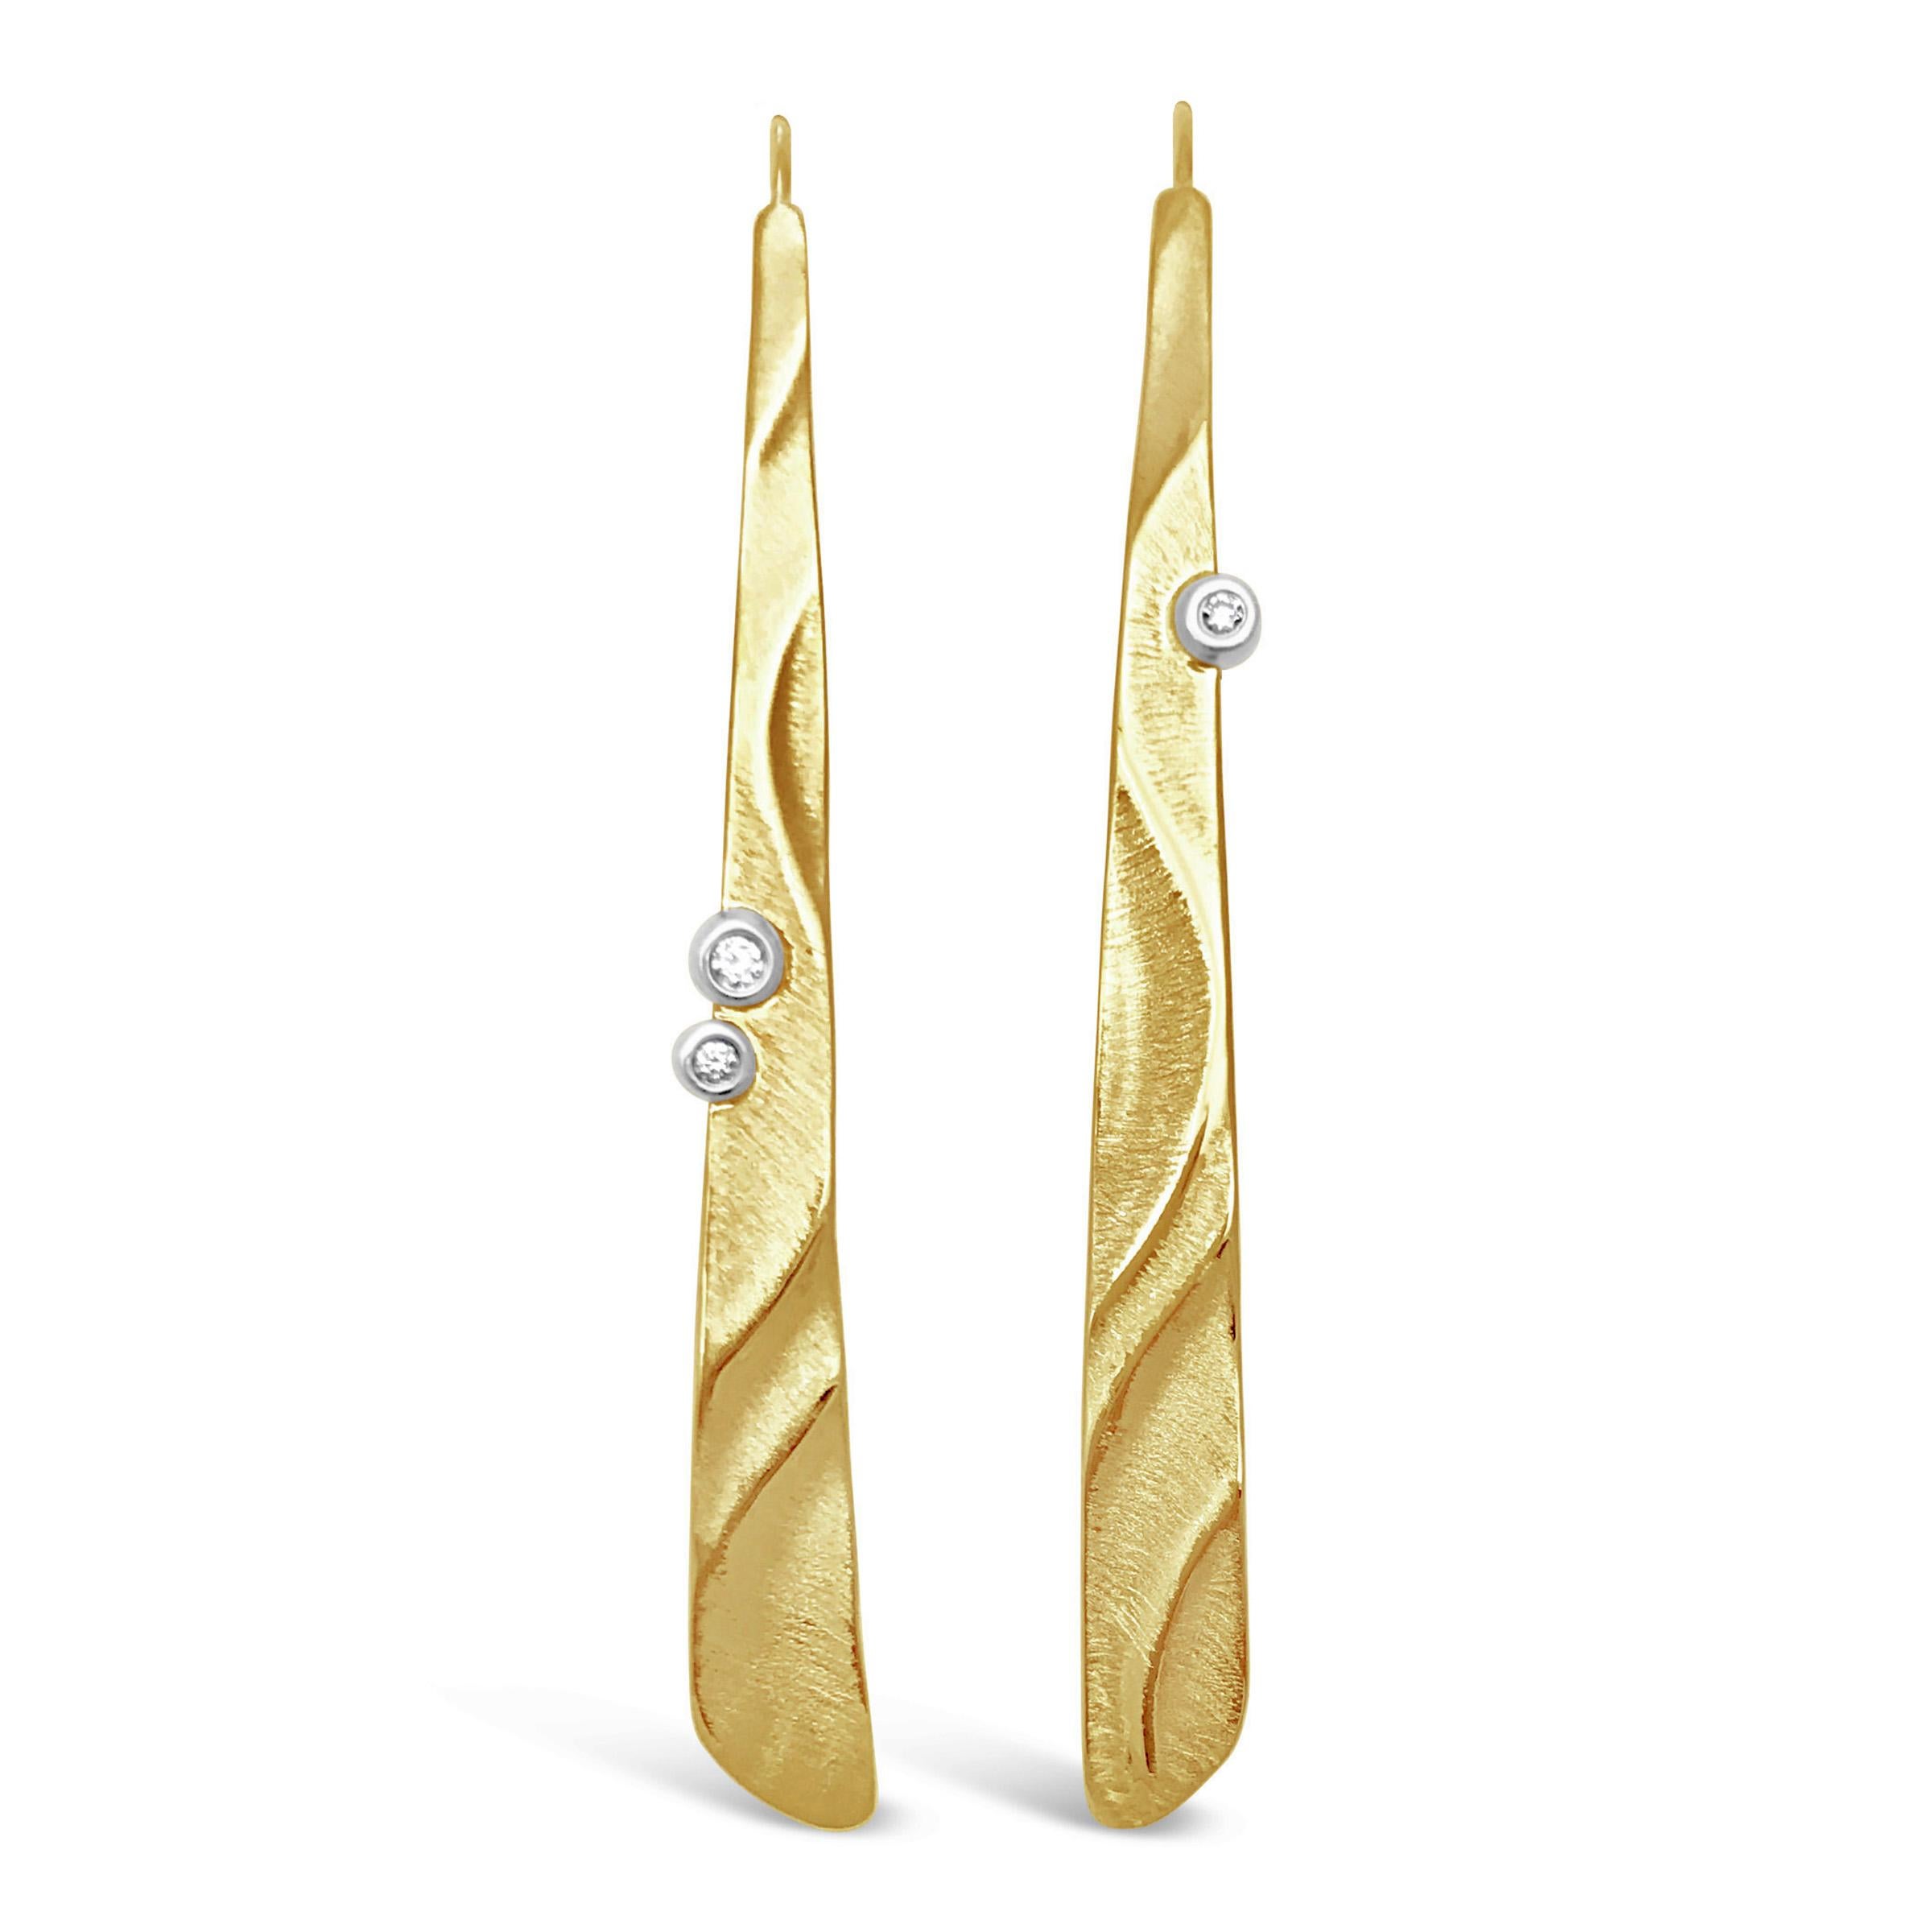 Keiko Mita's Long Puzzle Earrings, which are 59 mm l x 6 mm w, are handmade from 14 Karat Yellow Gold and 0.03 carats Diamonds set in 14 Karat white gold. The artist's puzzle pattern and signature Sand Dune texture continue from left to right. 
